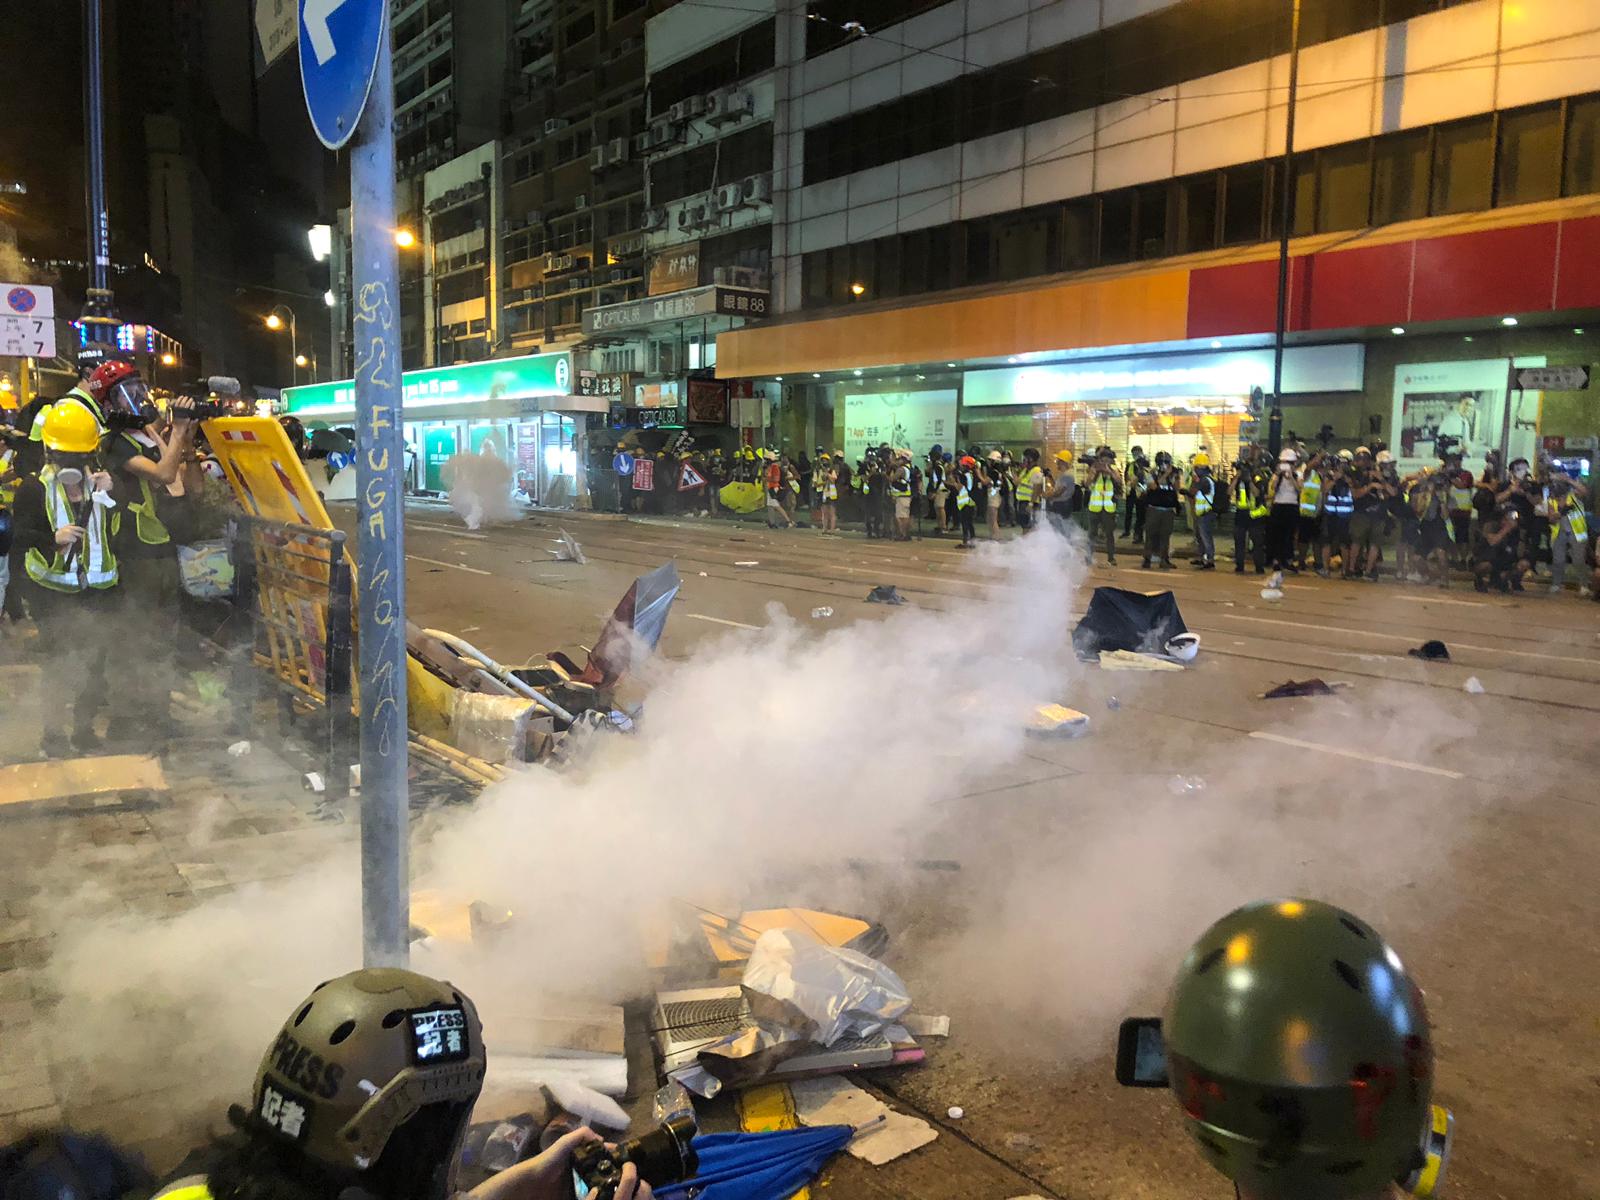 Hong Kong riot police face off with protesters Live updates